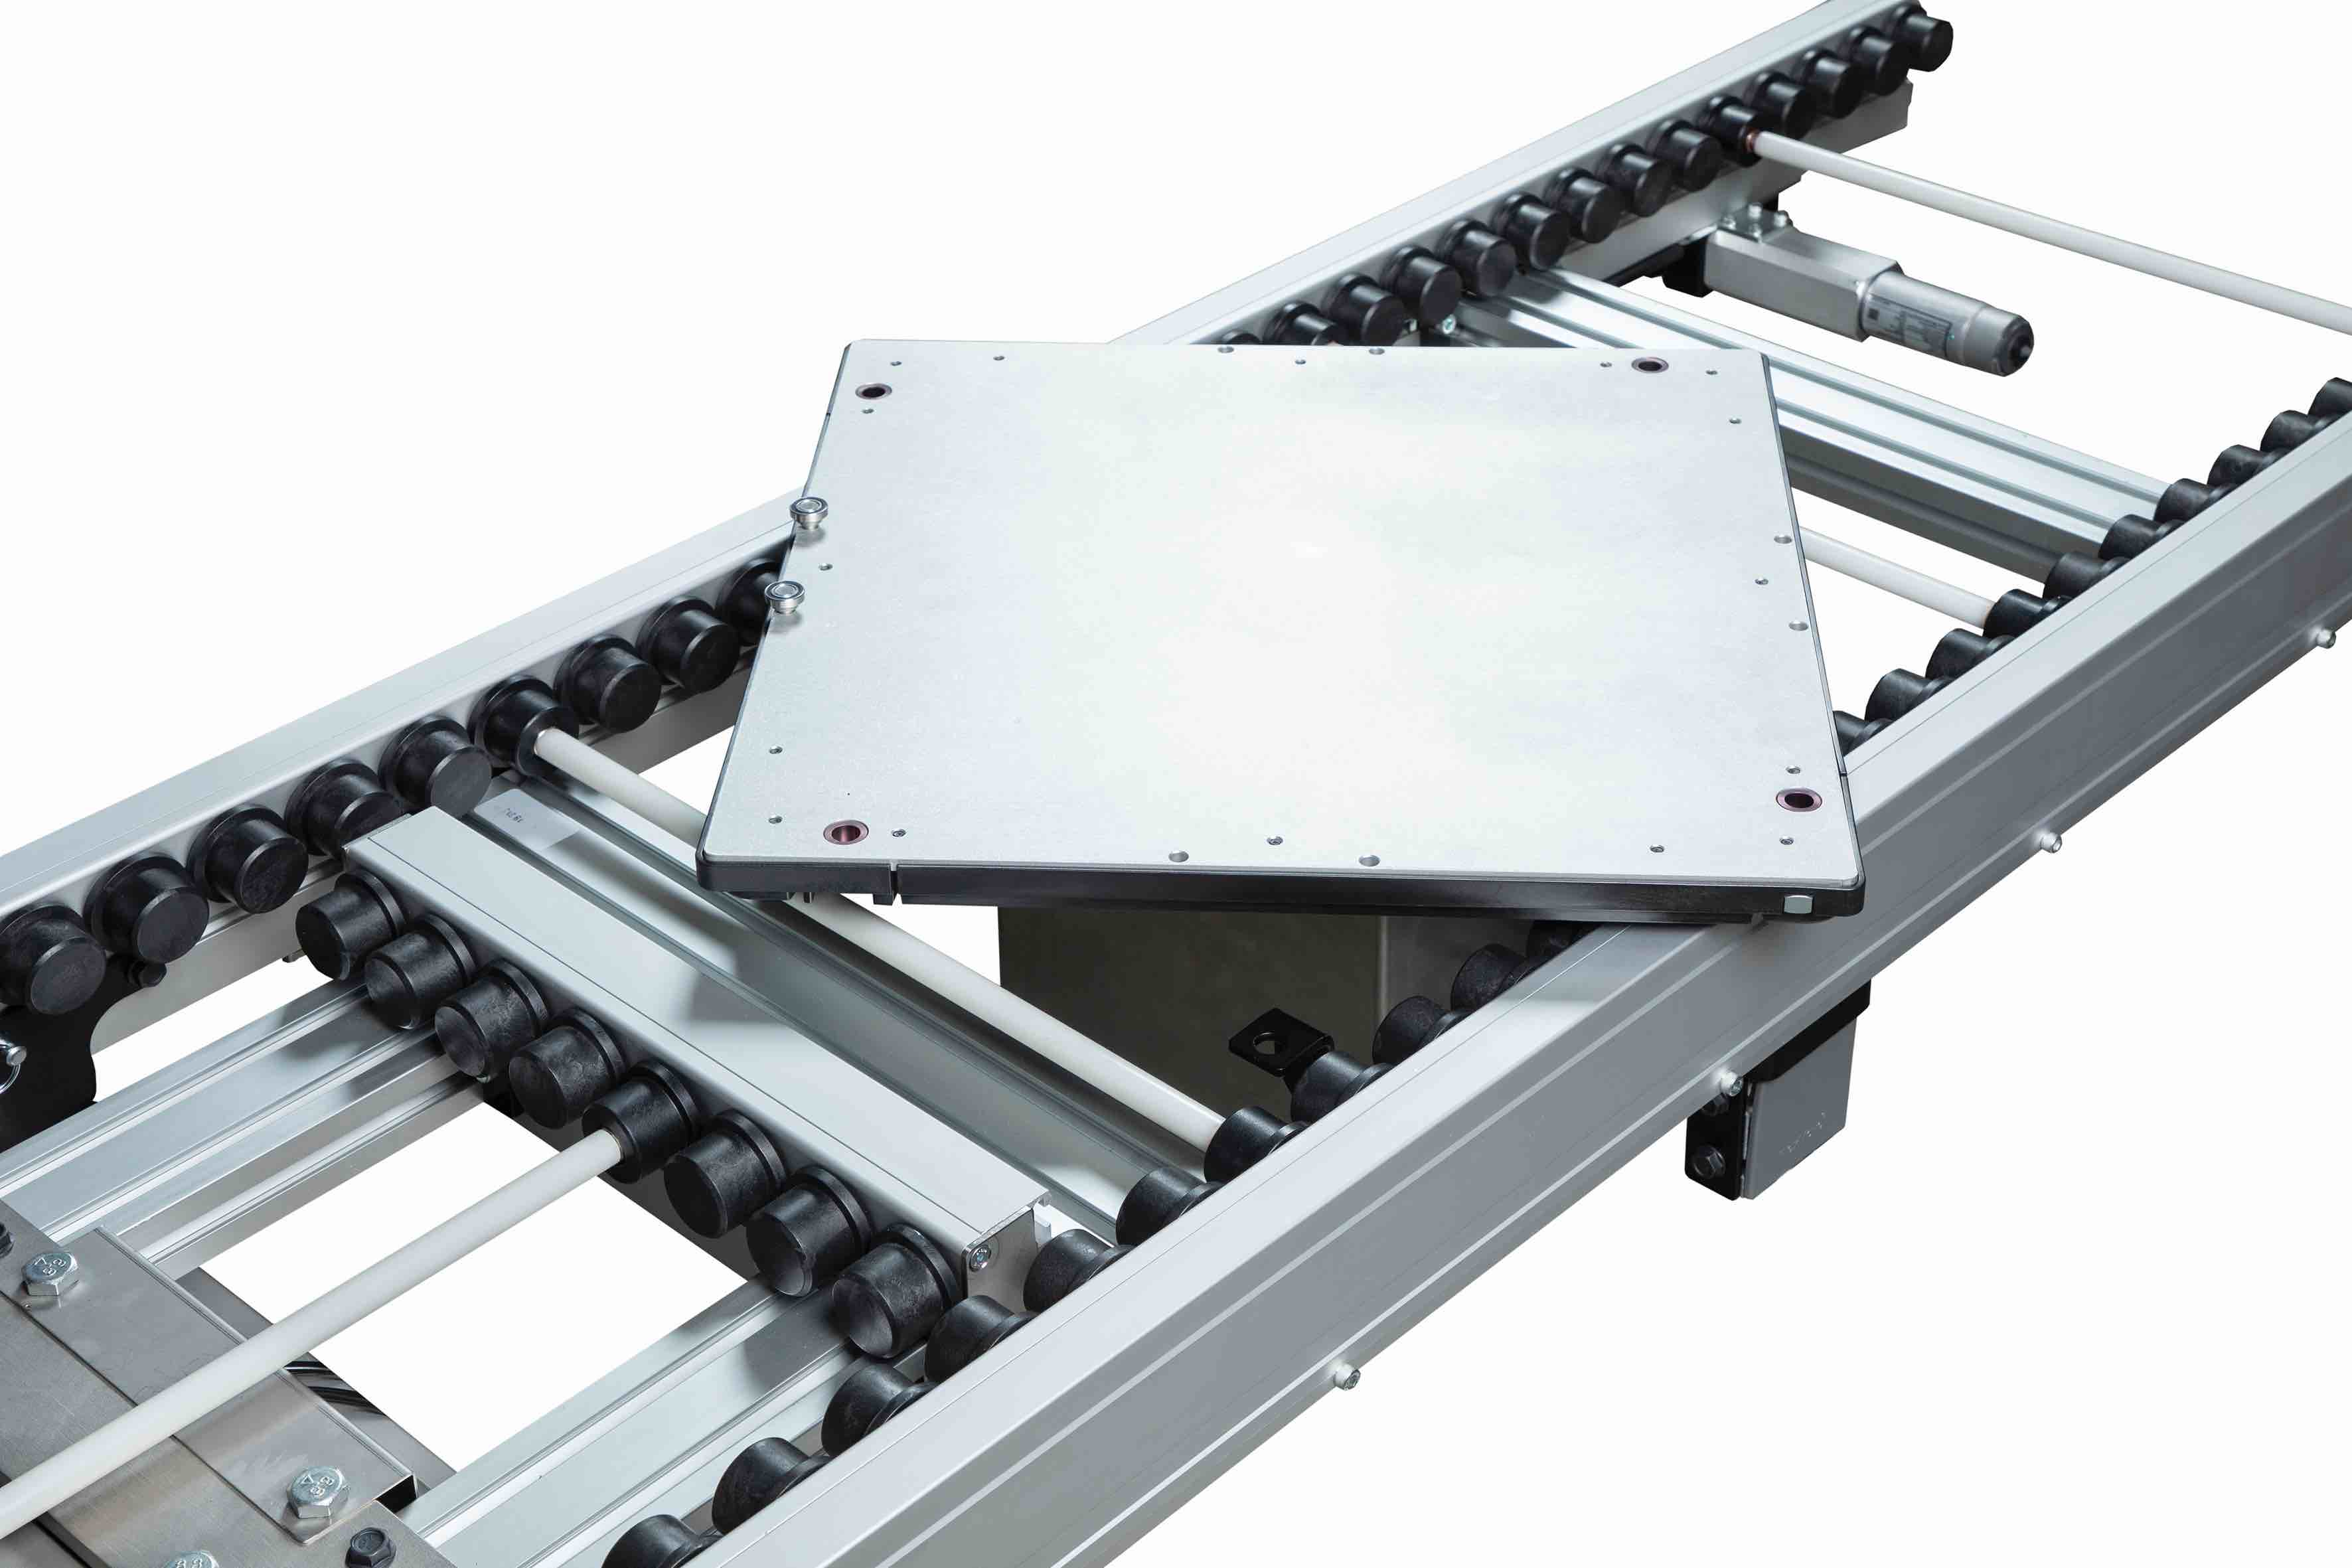 The basics of using conveyors in a cleanroom